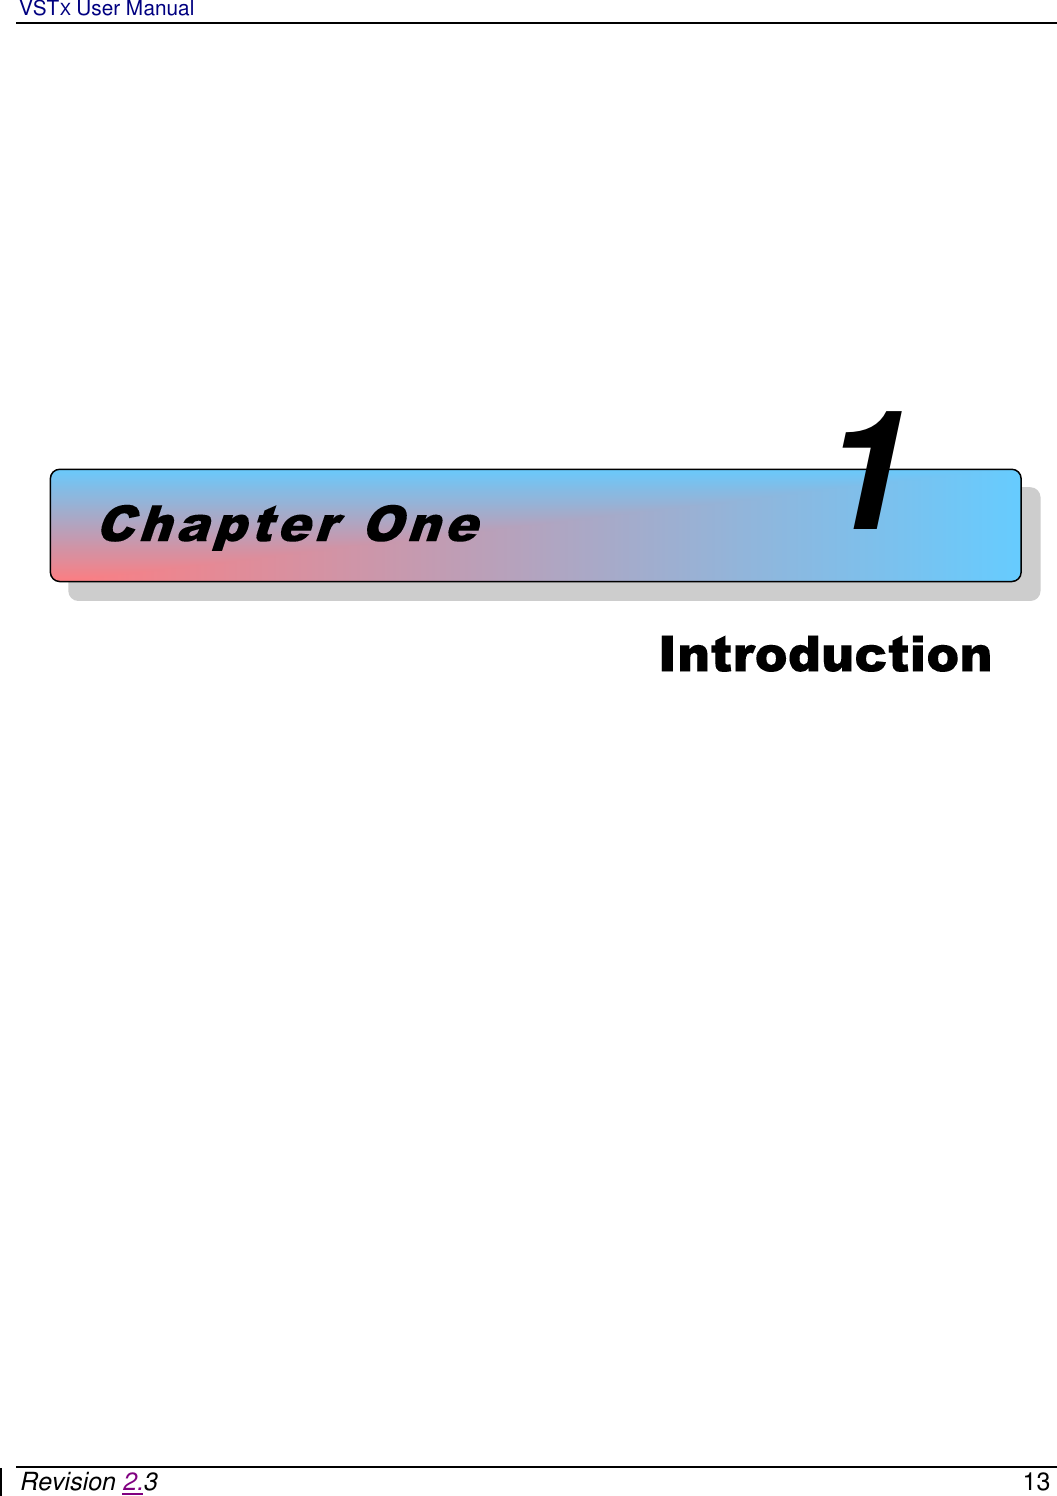 VSTX User Manual   Revision 2.3    13           Chapter One1Introduction  